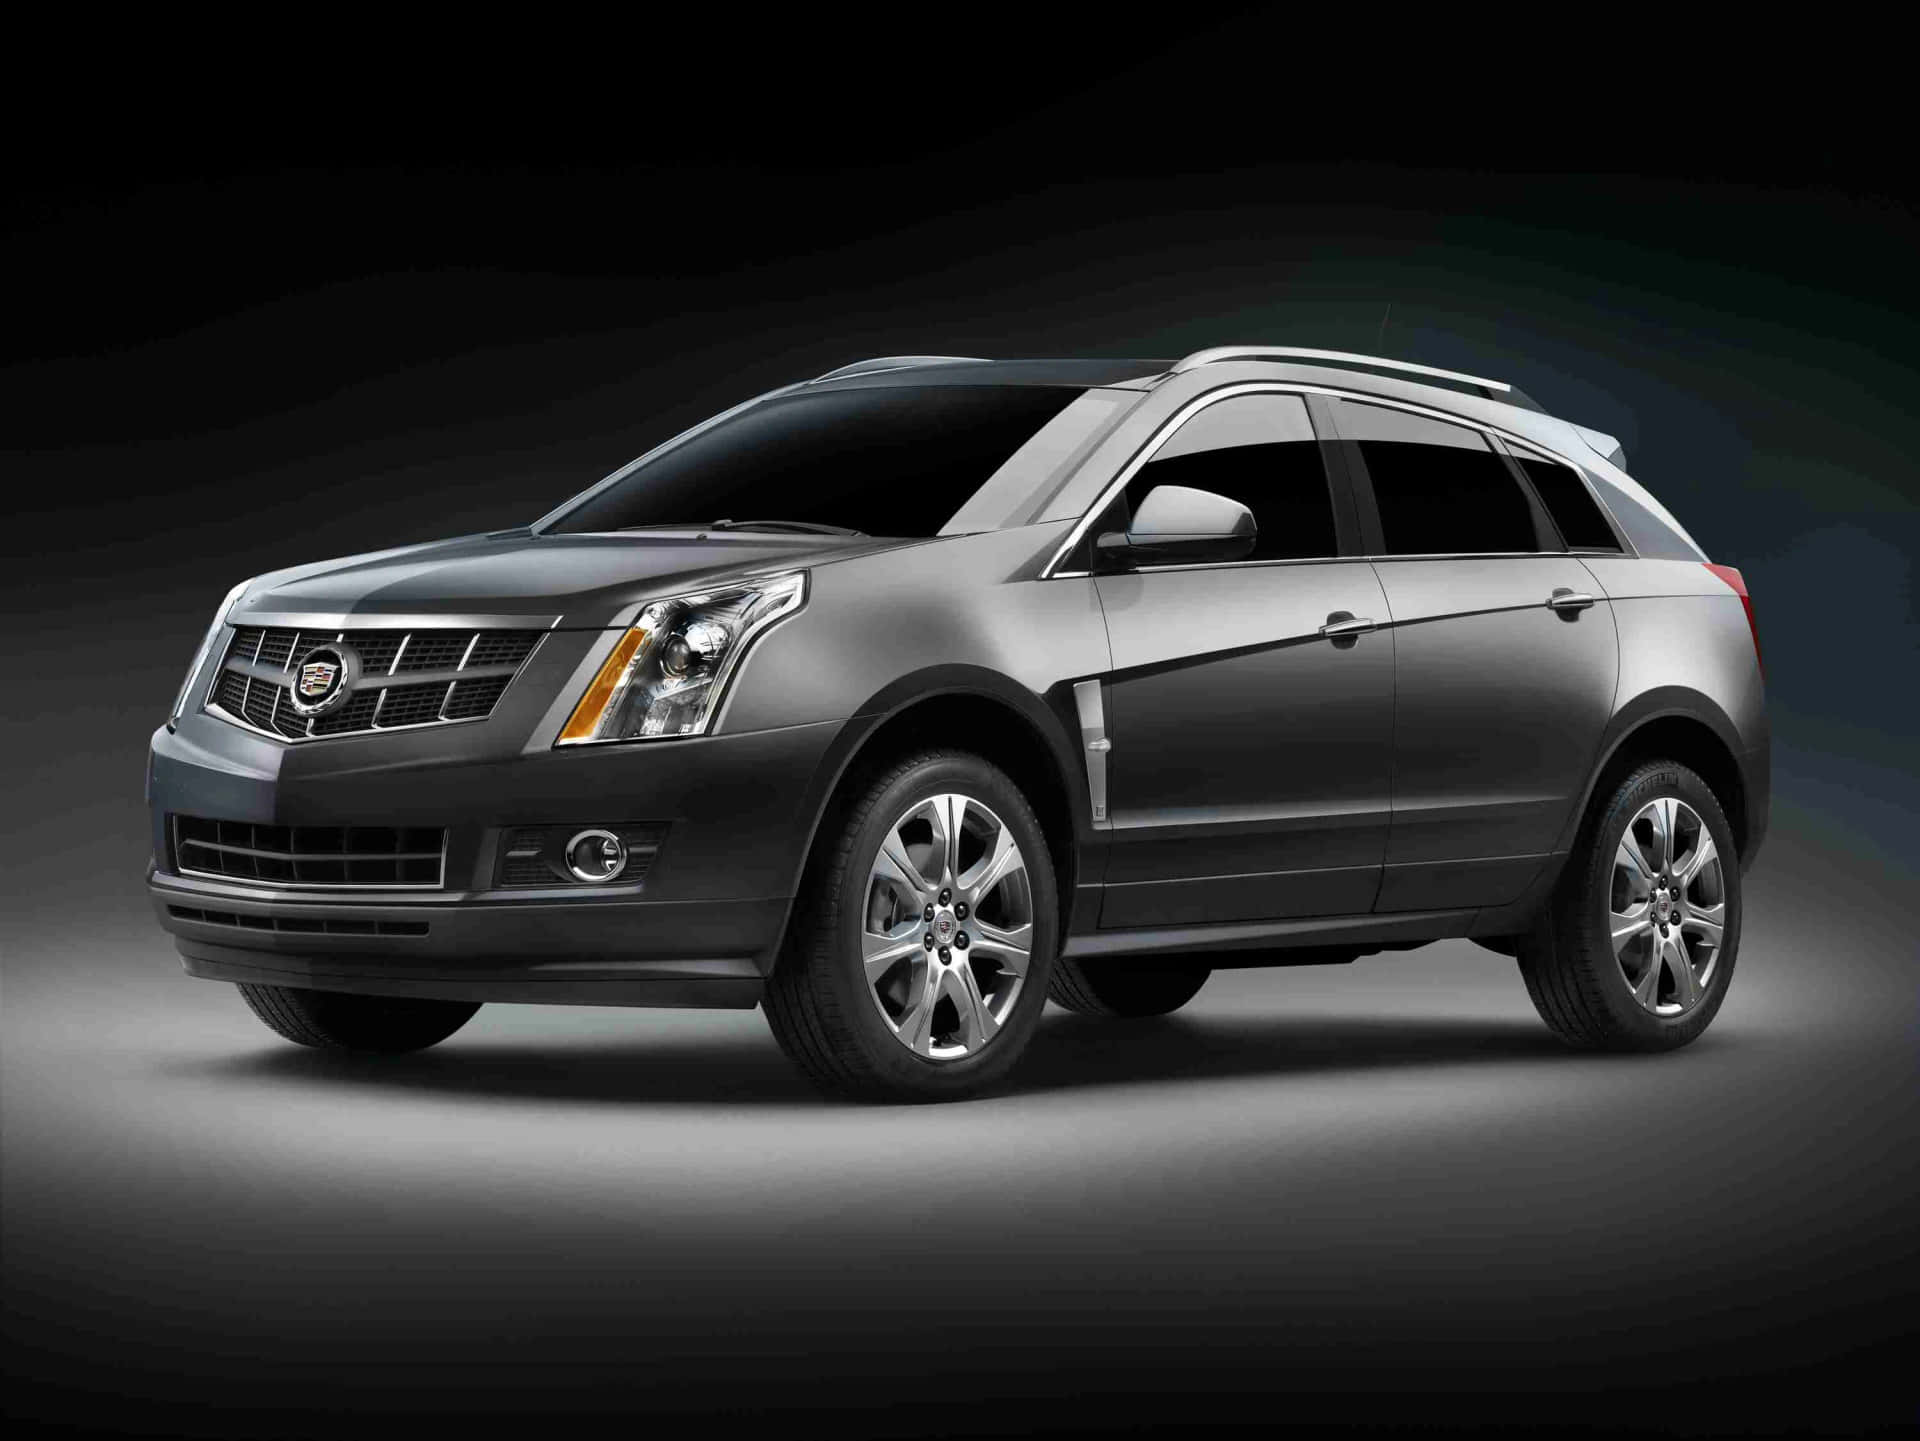 Superior Blend of Luxury and Power: the Cadillac SRX Wallpaper